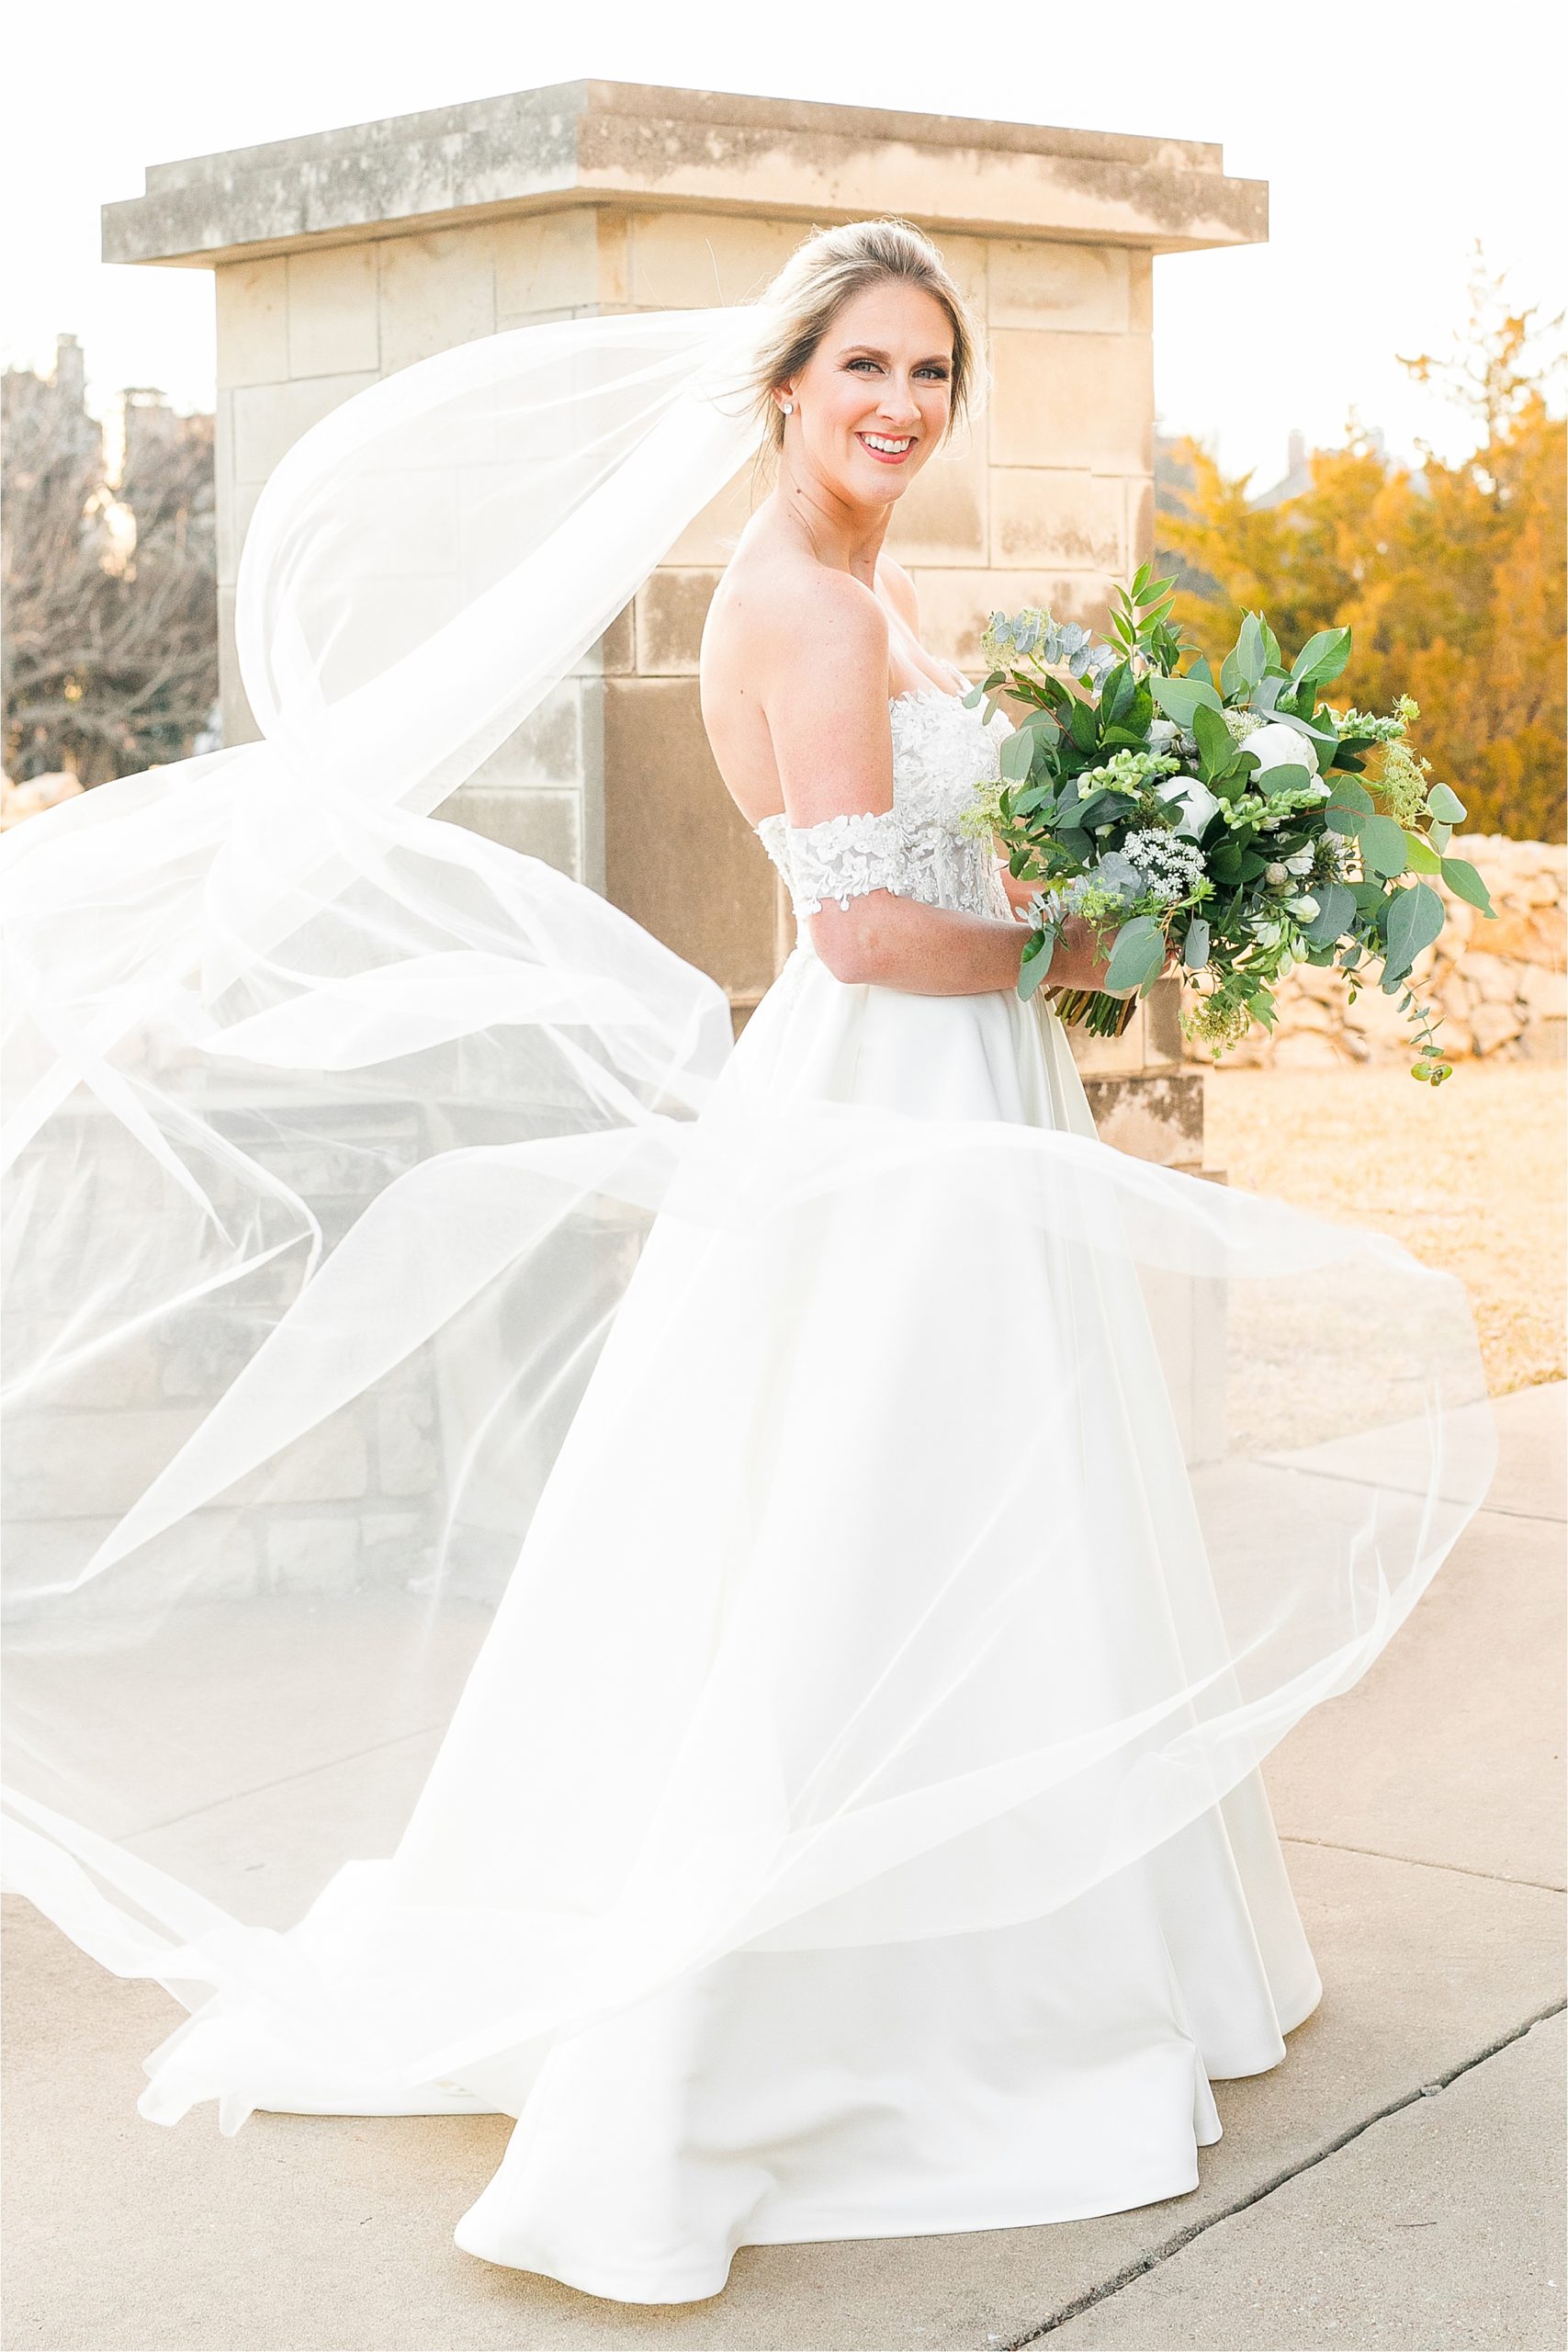 A bride smiles at the camera with a lush bouquet and the sunset behind her as her veil blows in the wind circling around her during her adriatica village bridal portraits in McKinney, Texas with Hill Country Wedding Photographer Jillian Hogan 